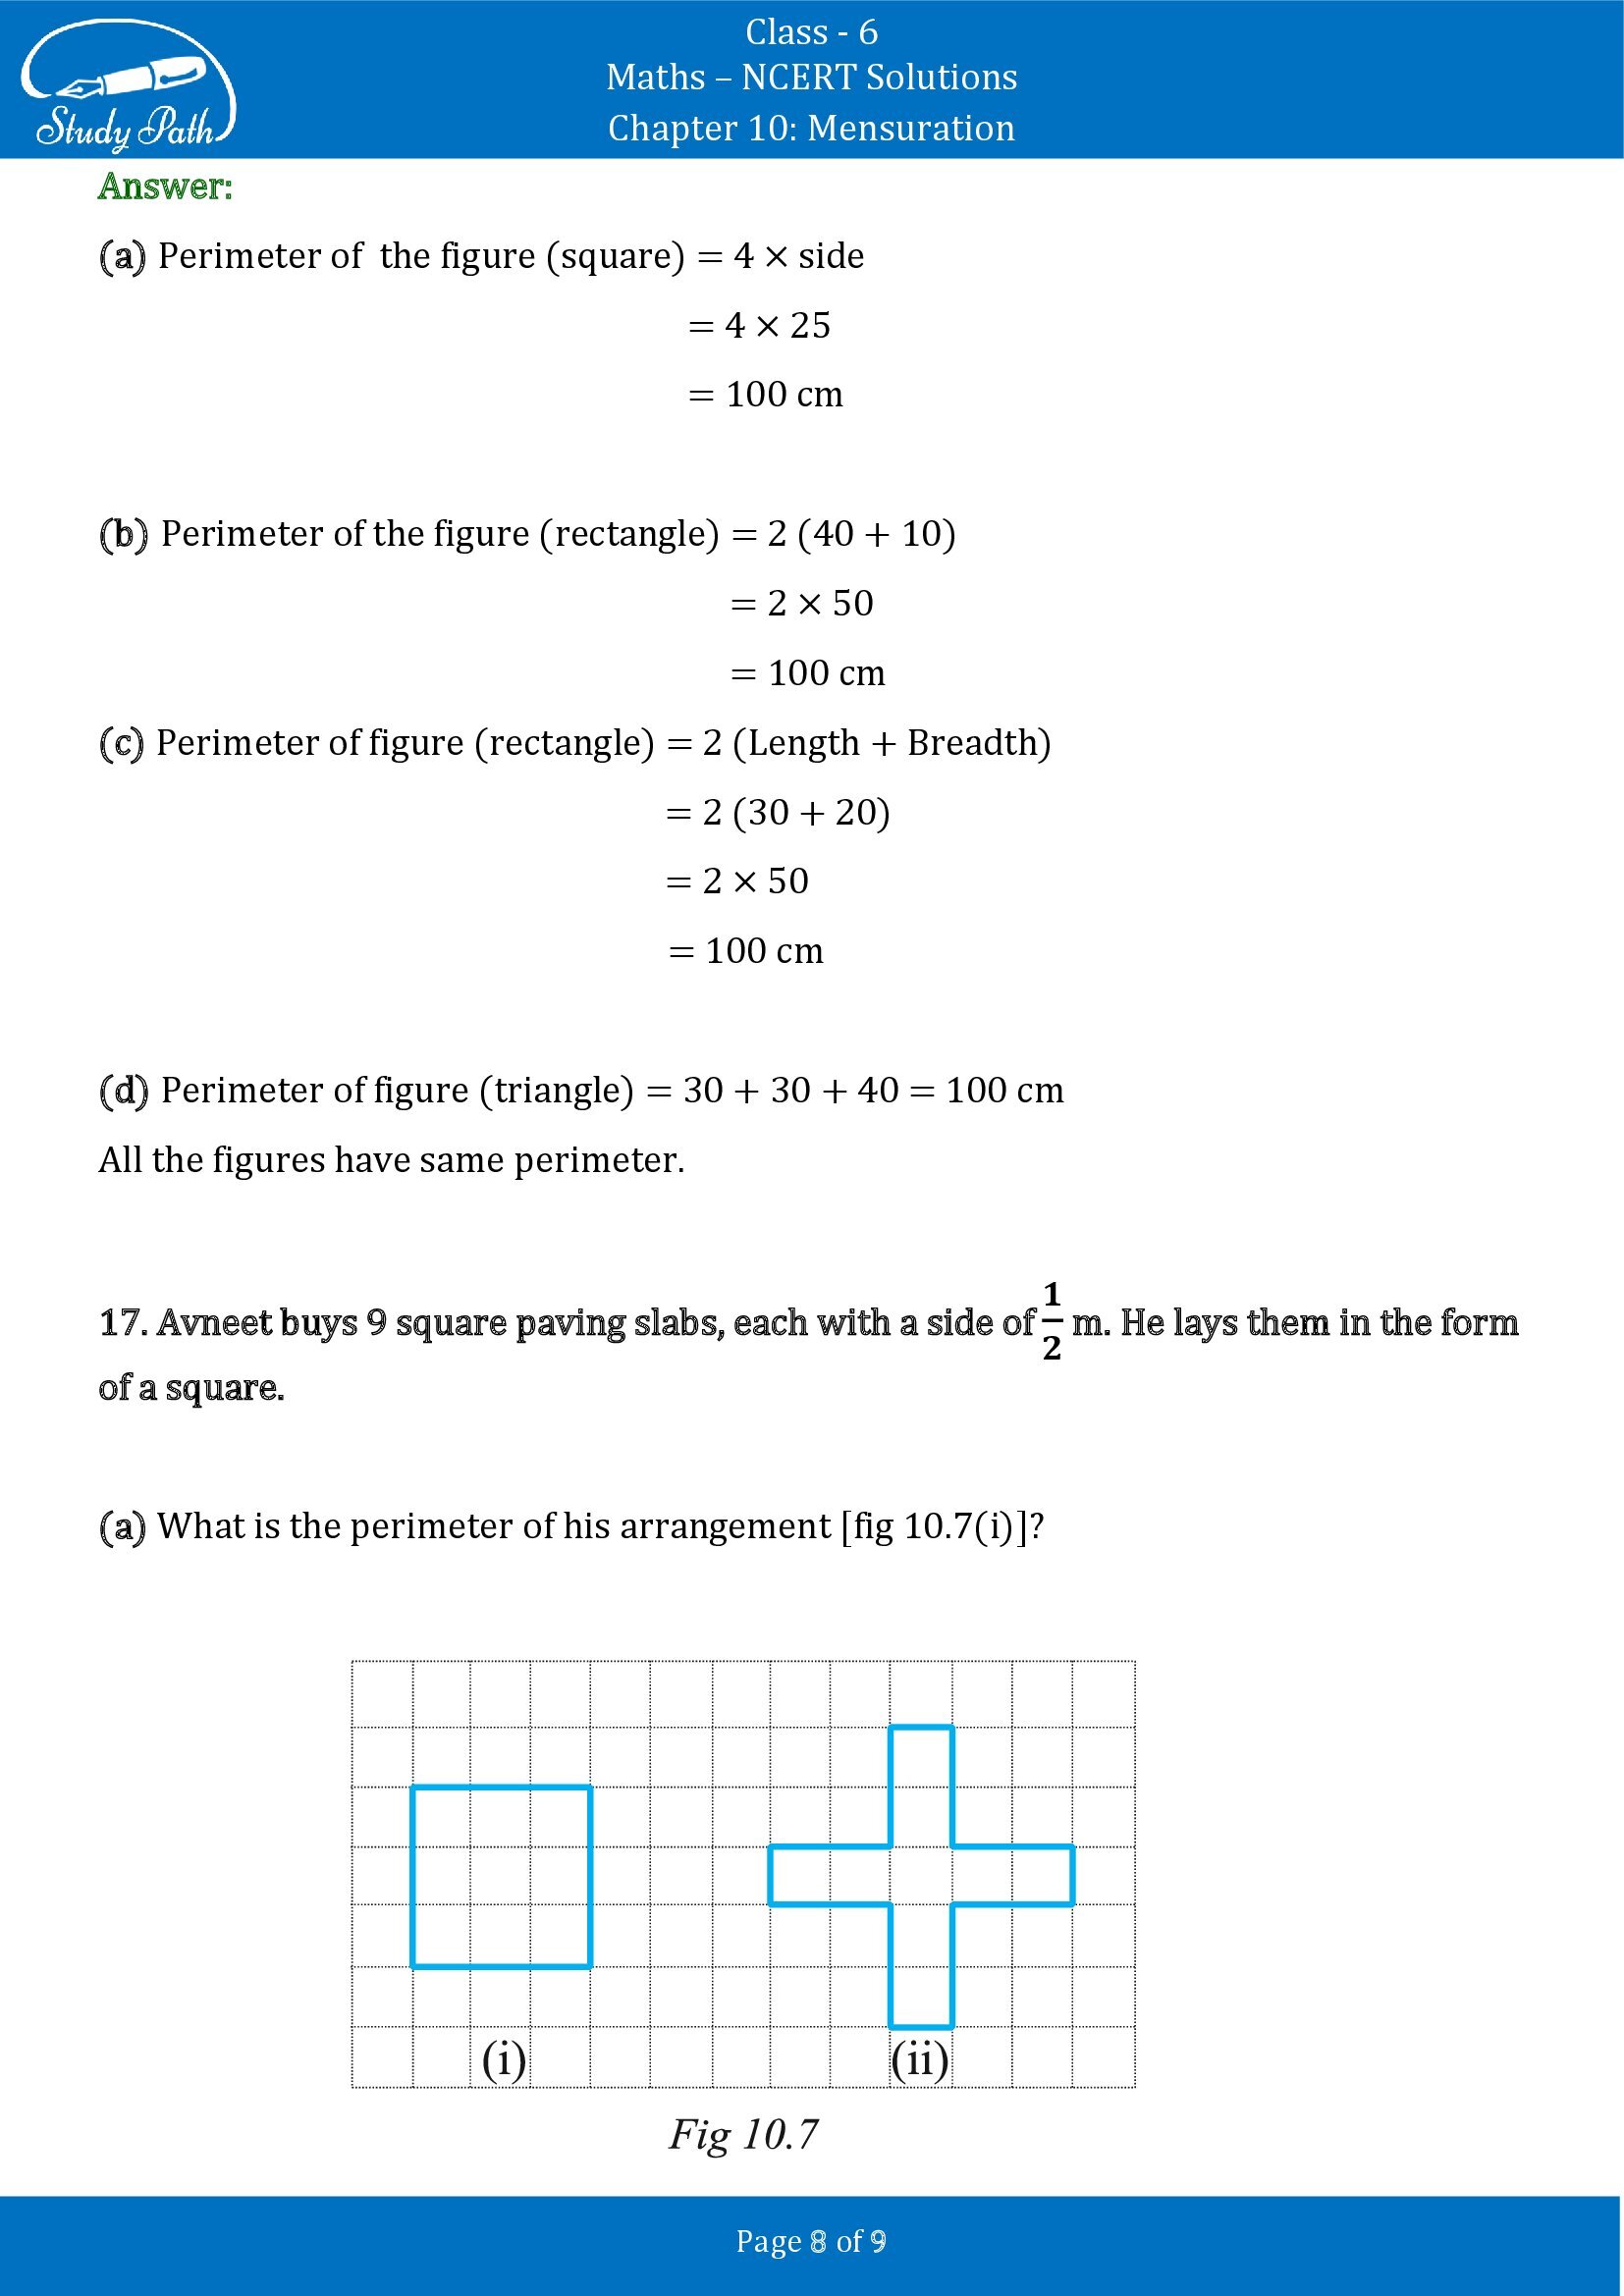 NCERT Solutions for Class 6 Maths Chapter 10 Mensuration Exercise 10.1 00008